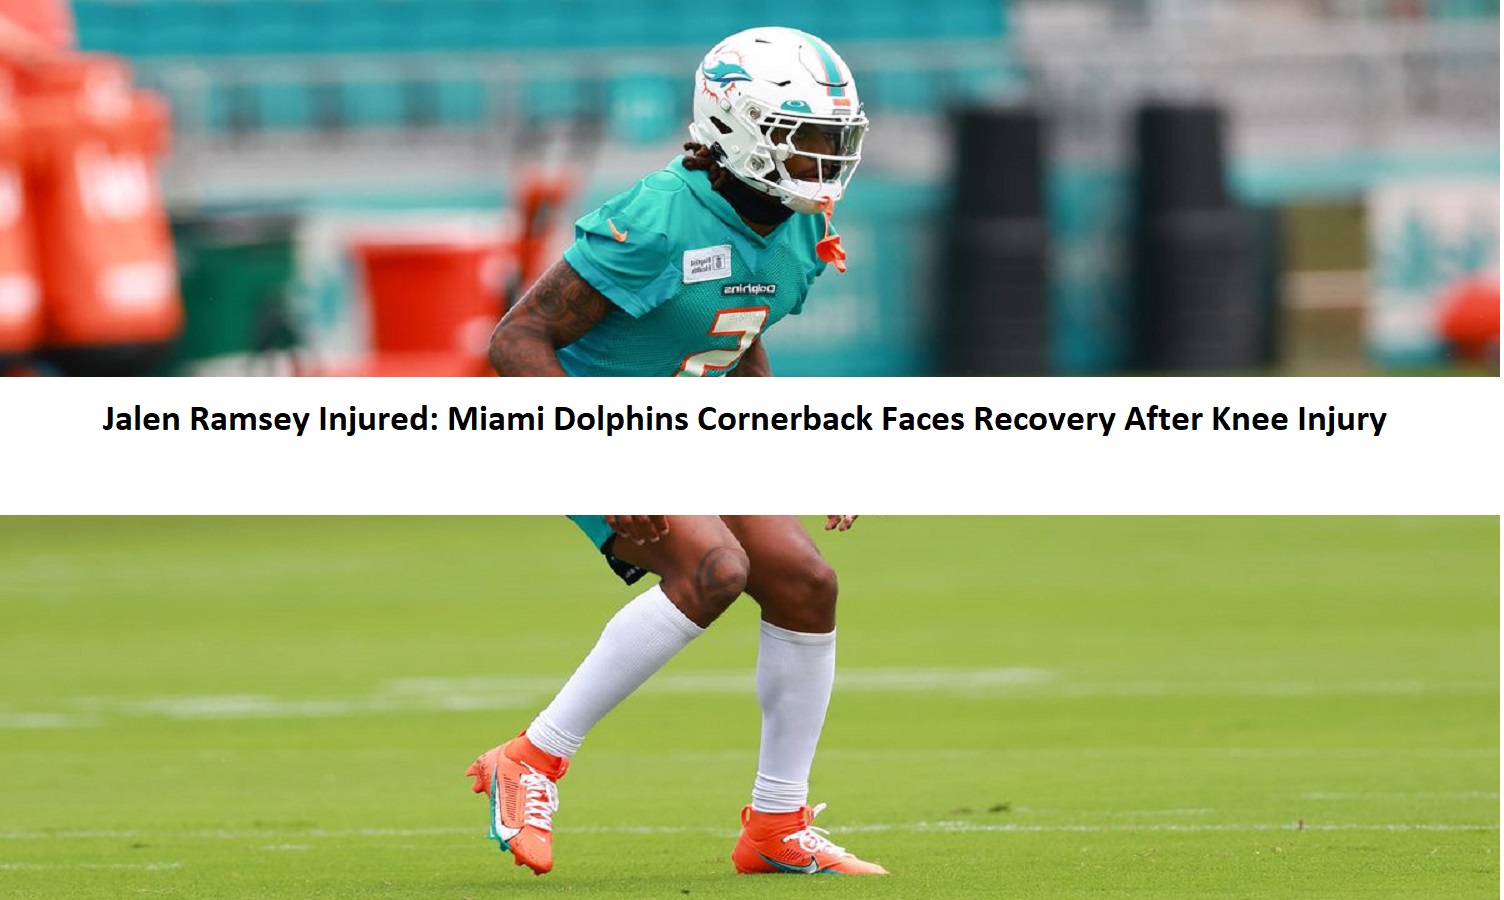 Jalen Ramsey Injured: Miami Dolphins Cornerback Faces Recovery After Knee Injury